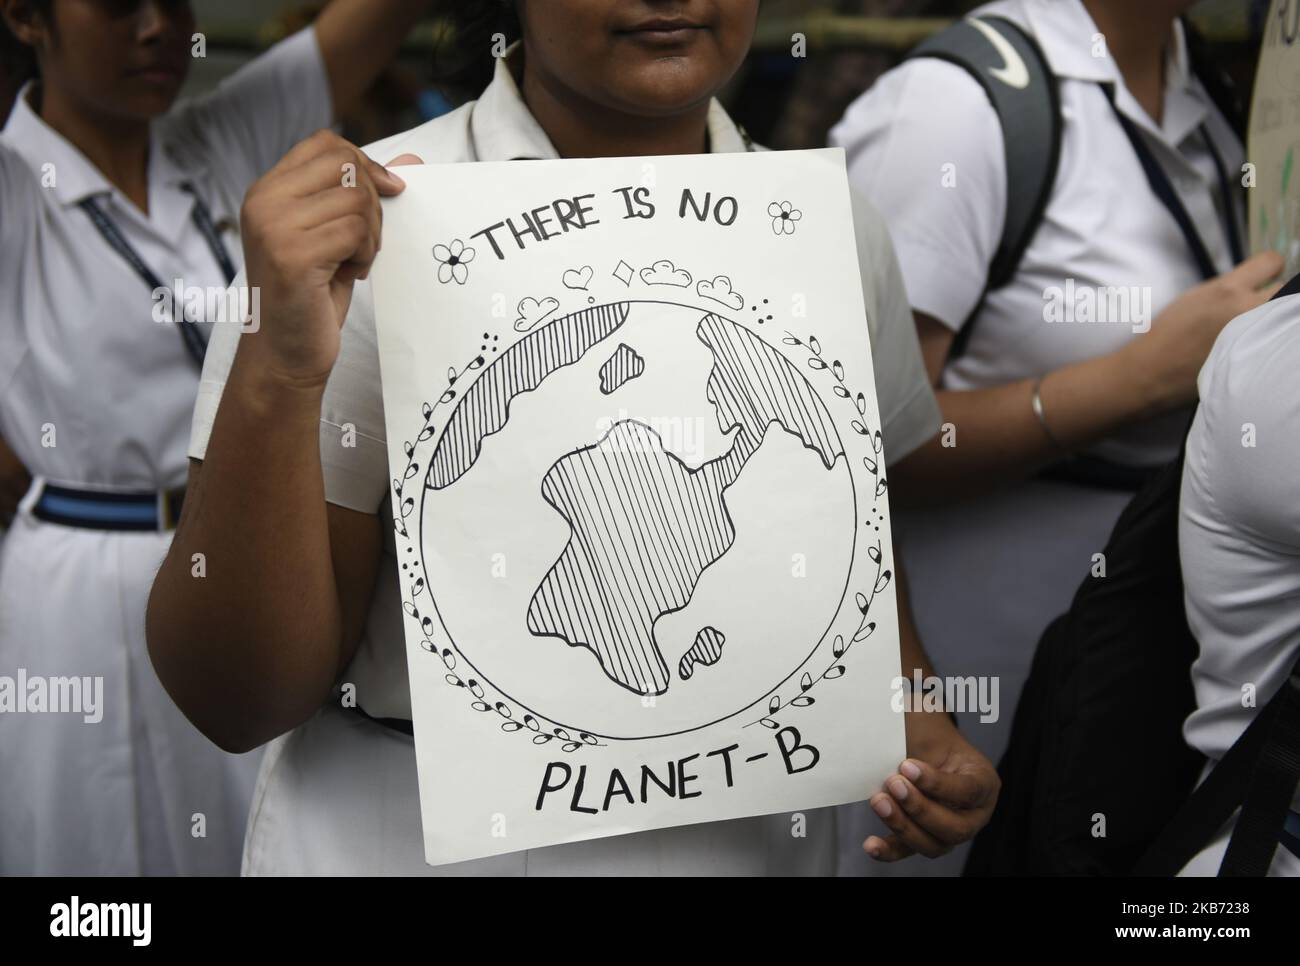 School students, Local Citizens, Environmental Activists shout slogans as they participate in a global climate strike to protest against governmental inaction towards climate breakdown and environmental pollution, part of demonstrations being held worldwide in a movement dubbed 'Fridays for Future', Kolkata, India, September 27, 2019. (Photo by Indranil Aditya/NurPhoto) Stock Photo